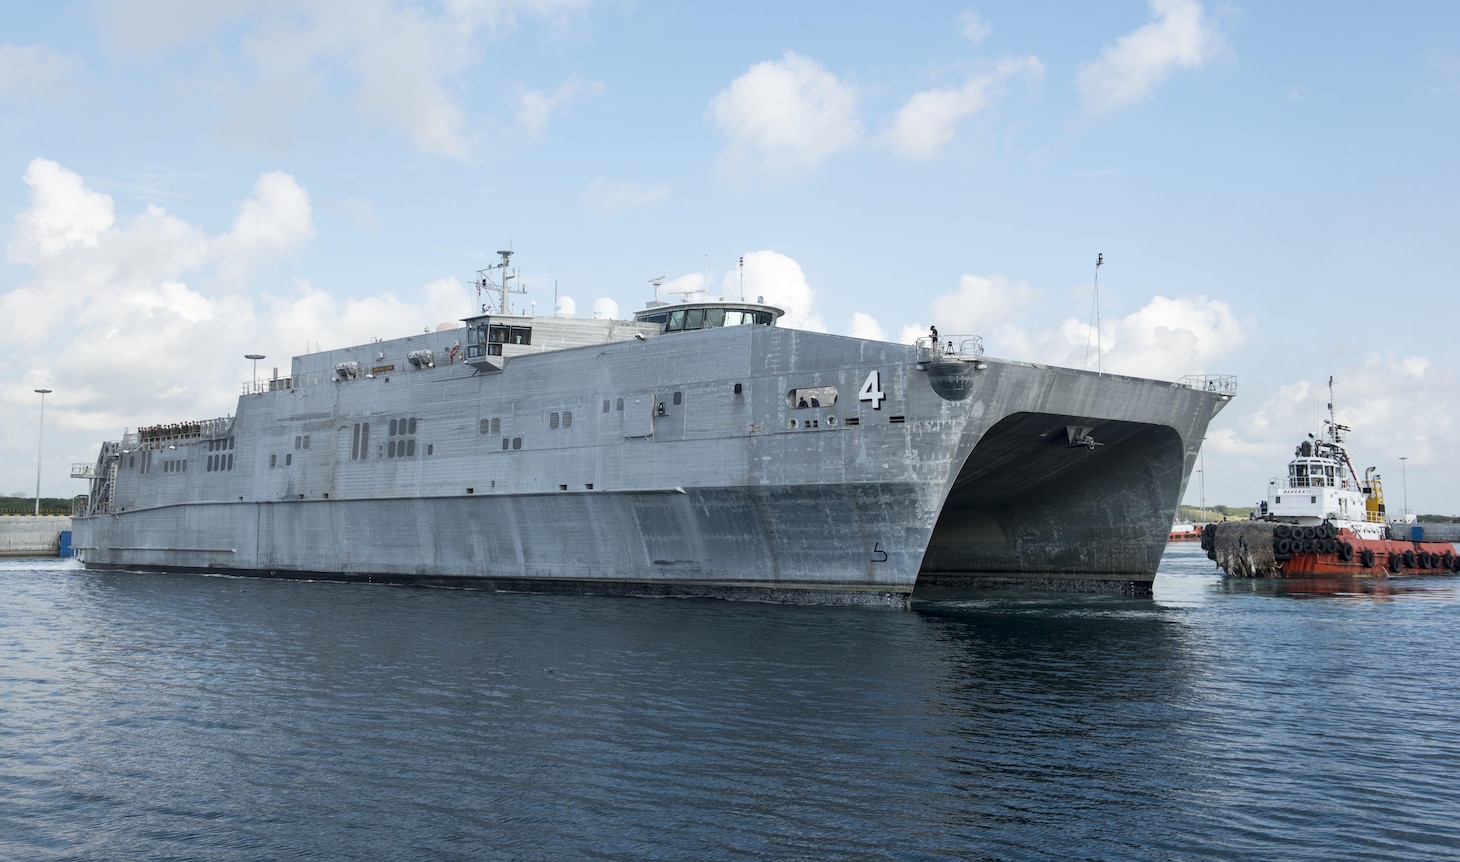 170307-N-OU129-075 HAMBANTOTA, Sri Lanka (Mar. 7, 2017) The expeditionary fast transport ship USNS Fall River (T-EPF-4) arrives in Hambantota to participate in Pacific Partnership 2017 mission stop Sri Lanka March 7. Pacific Partnership is the largest annual multilateral humanitarian assistance and disaster relief preparedness mission conducted in the Indo-Asia-Pacific and aims to enhance regional coordination in areas such as medical readiness and preparedness for manmade and natural disasters. (U.S. Navy photo by Mass Communication Specialist 2nd Class Joshua Fulton/Released)